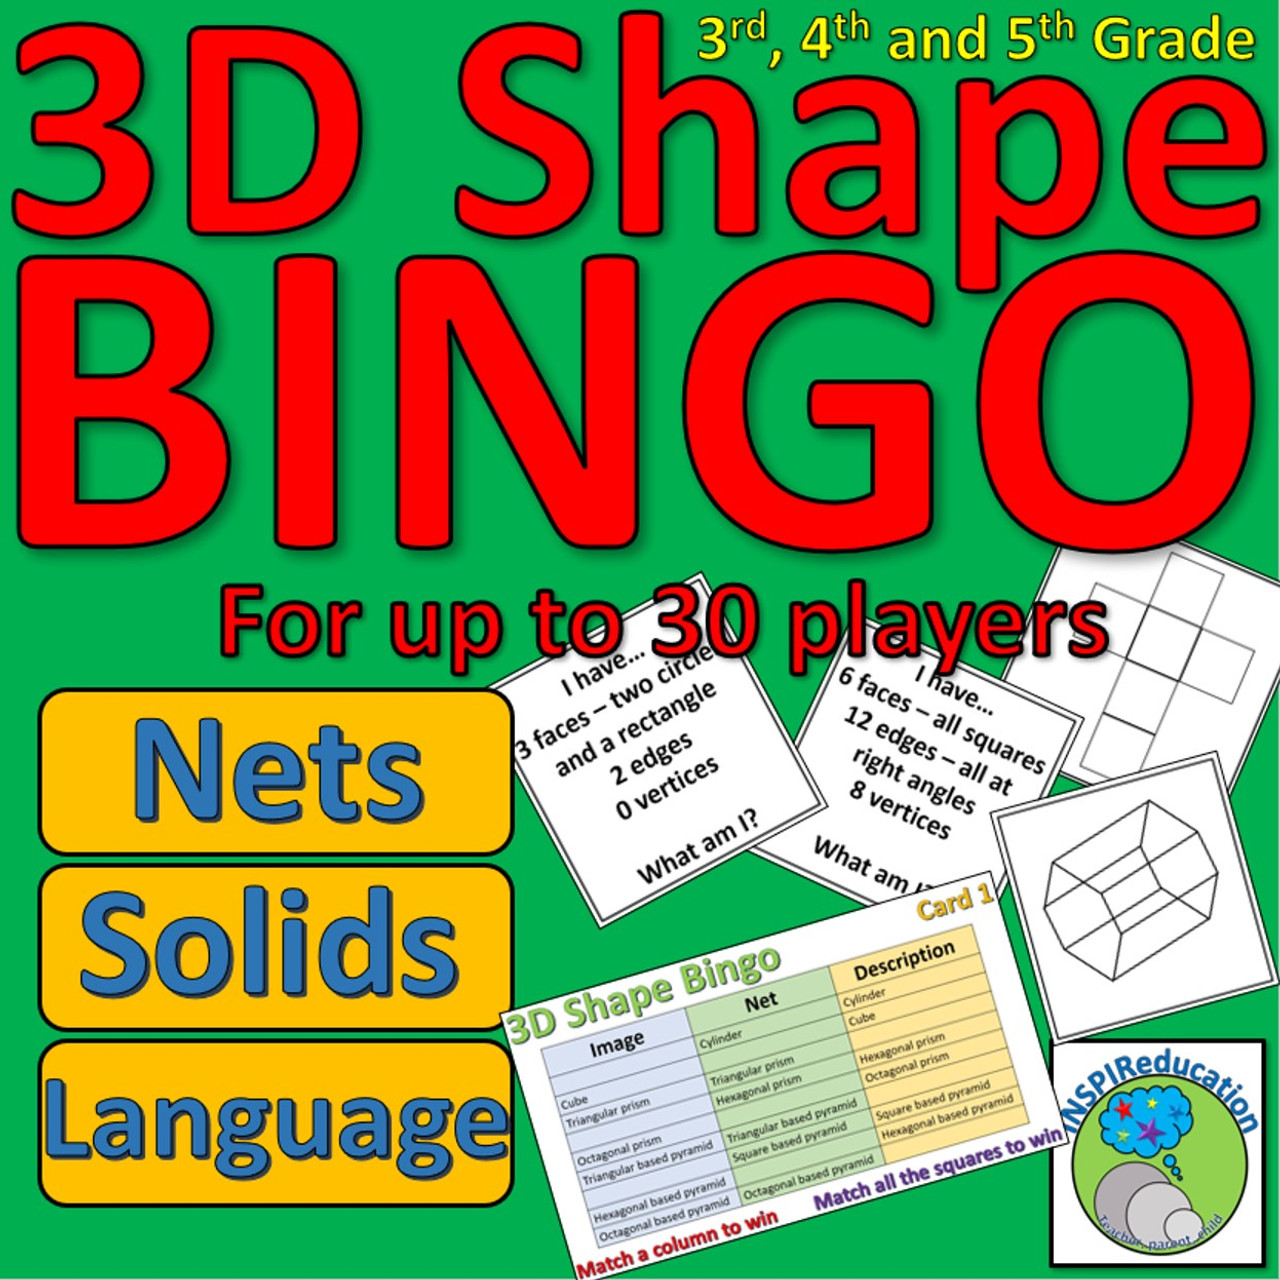 3D Shape Bingo, Images of shapes, nets and descriptions for up to 30 Players